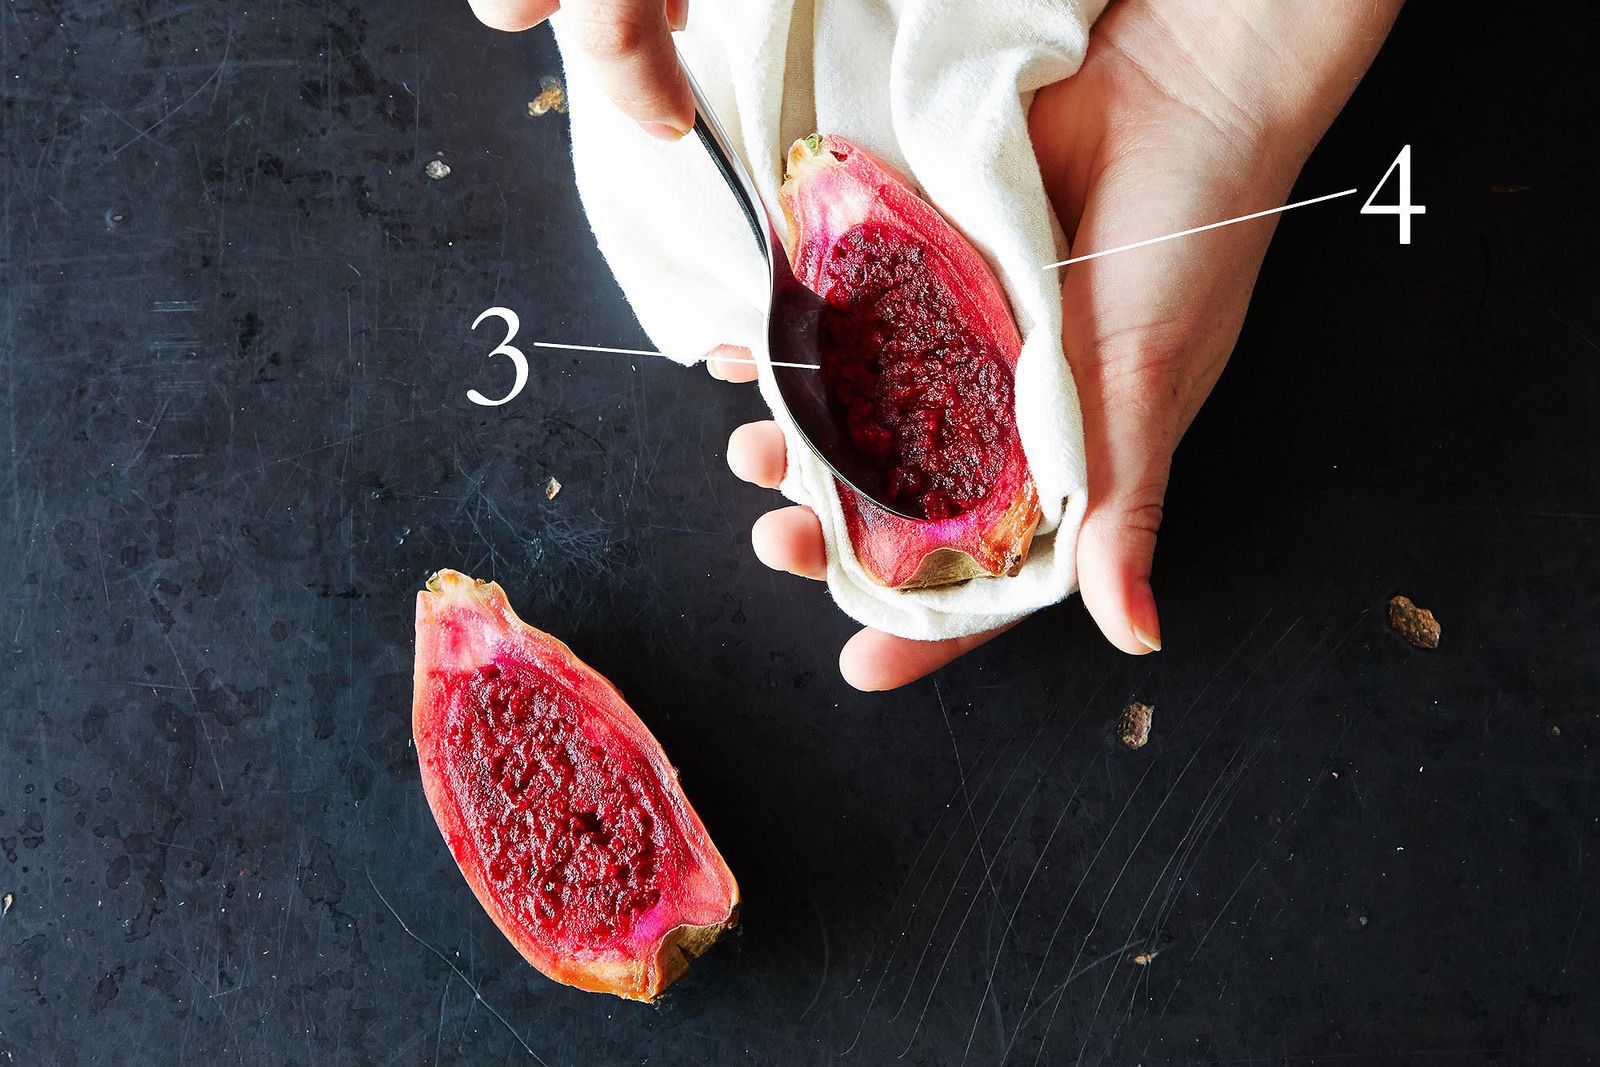 Cactus Pears and 10 Ways to Use Them, from Food52